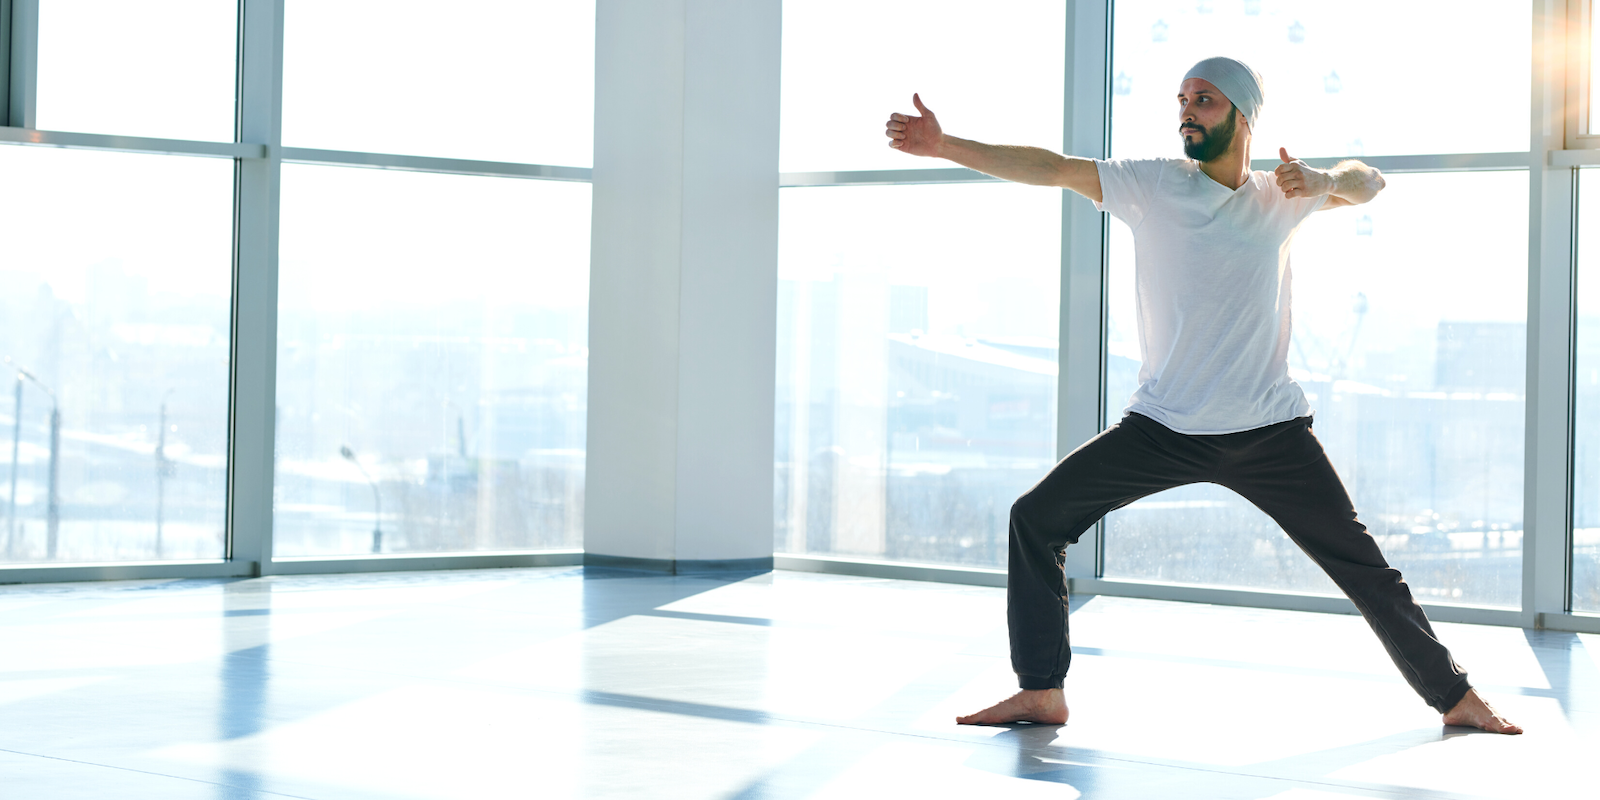 A man with a short beard wearing black workout pants, a white t-shirt and a white turban does a yoga warrior pose in an empty room with large windows overlooking a cityscape.